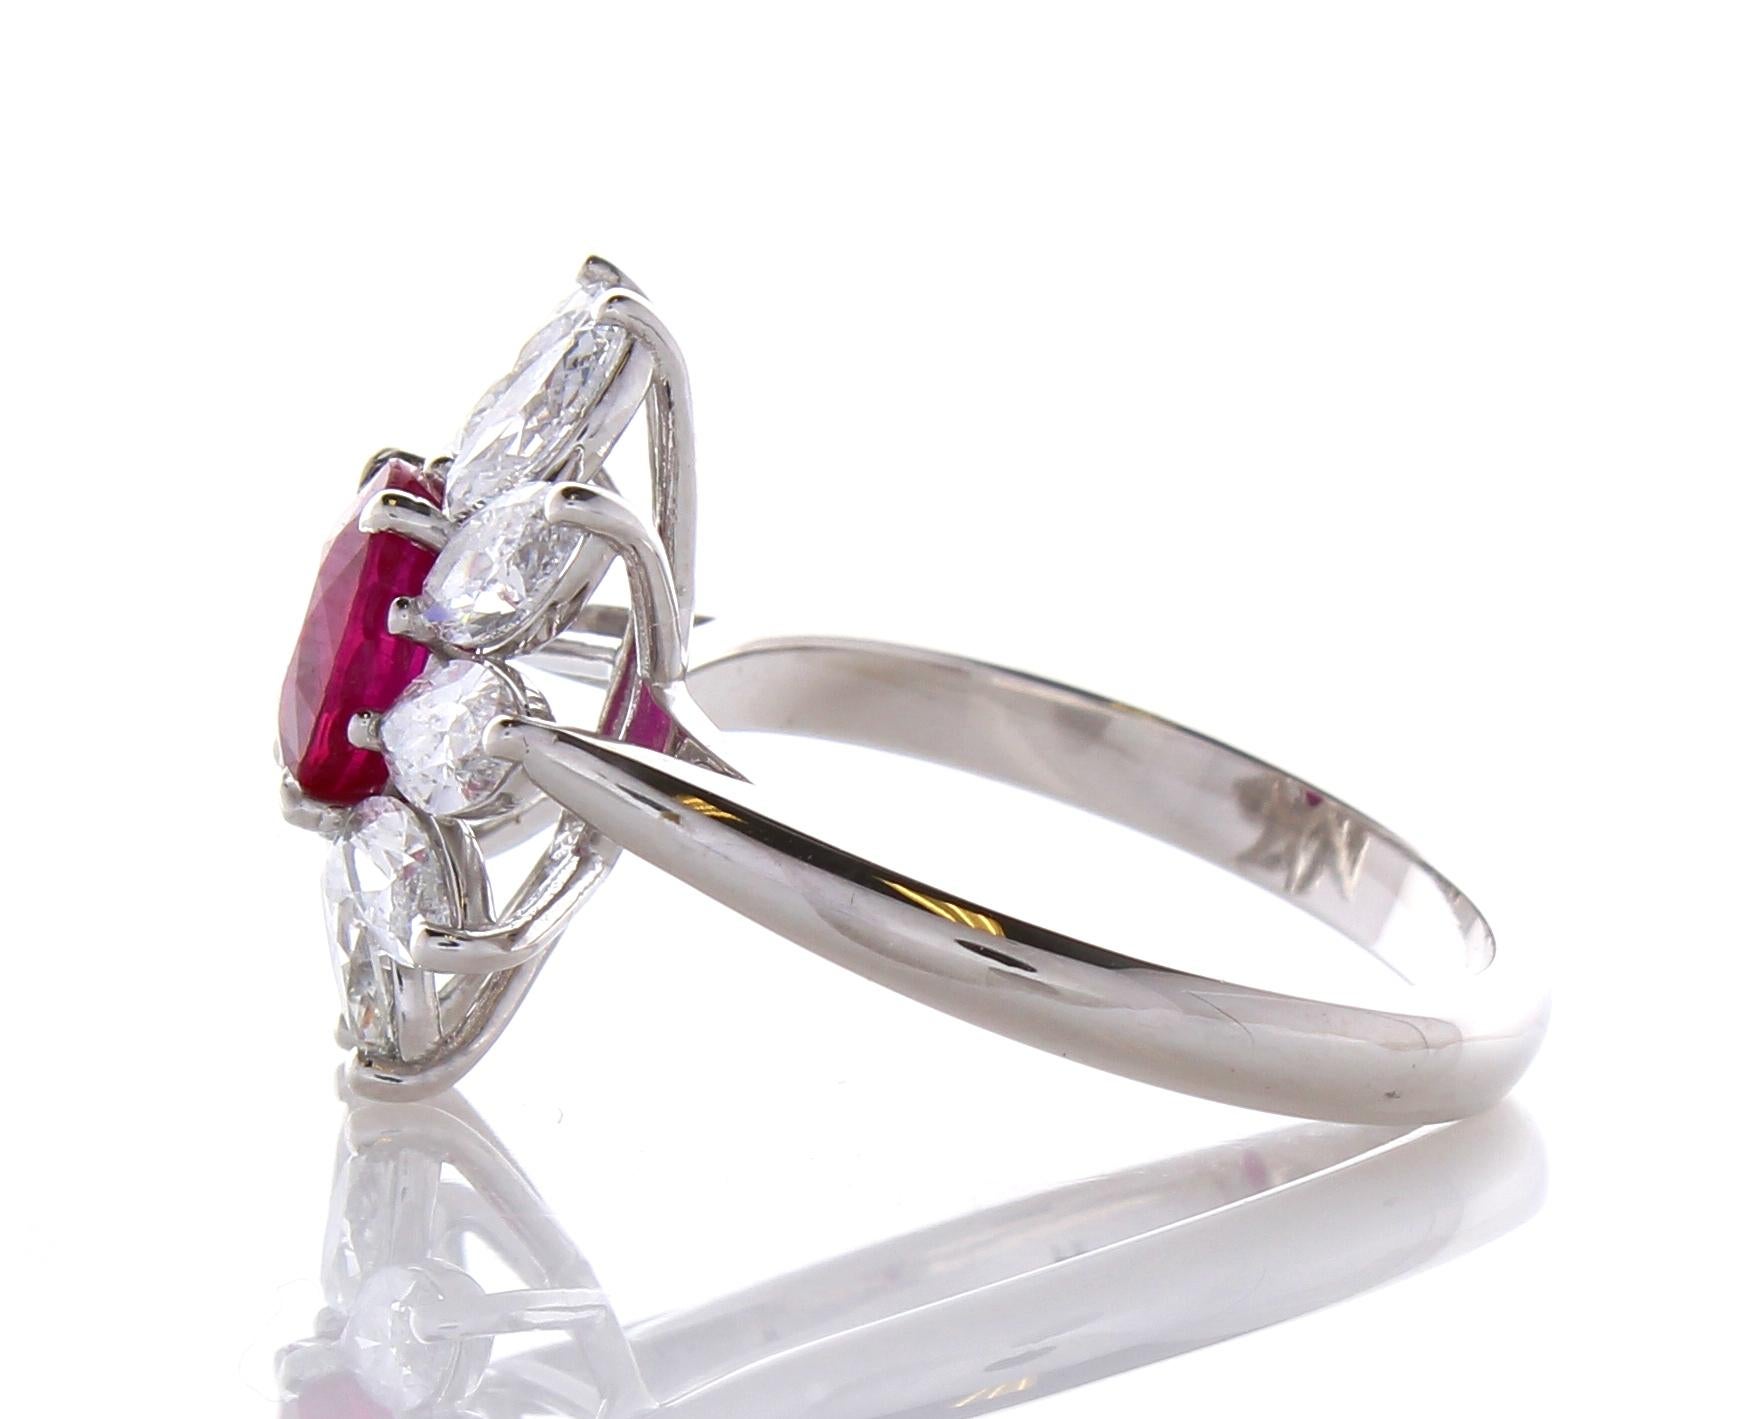 Contemporary AGL Certified 1.26 Carat Oval Ruby & Marquise Diamond Ring in 18K White Gold